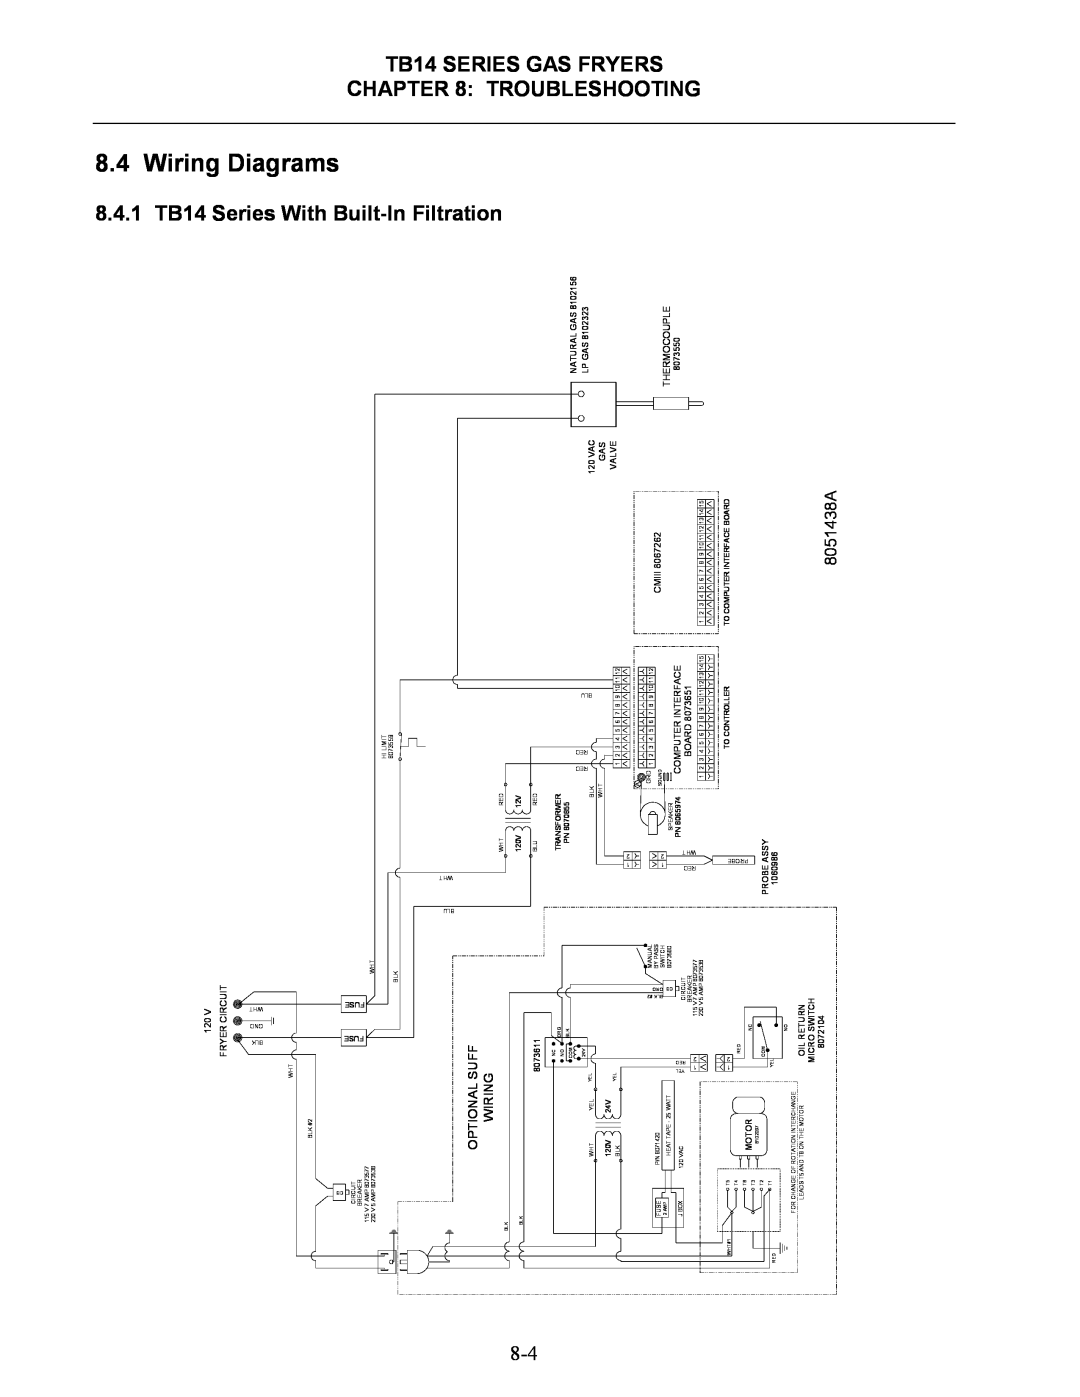 Frymaster Wiring, Diagrams, 8.4.1, TB14 Series, With Built, Filtration, TB14 SERIES GAS FRYERS TROUBLESHOOTING, Motor 